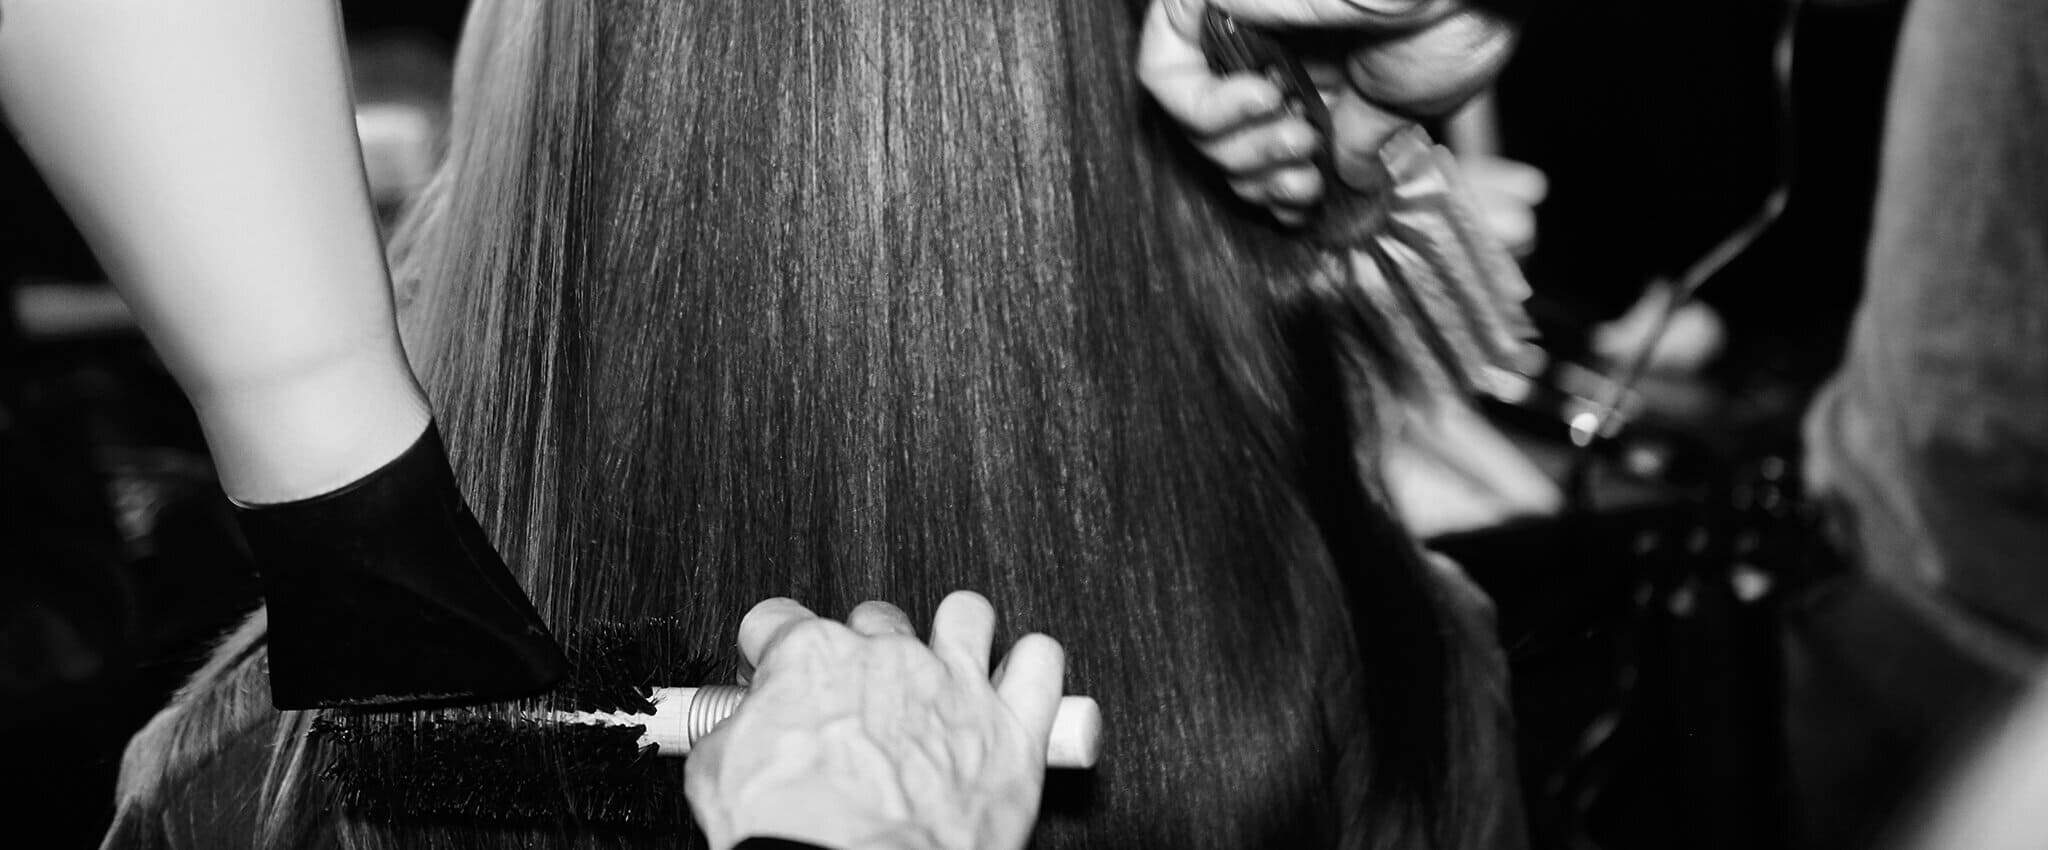 Close up of heat tongs being applied to a section of long dark hair.